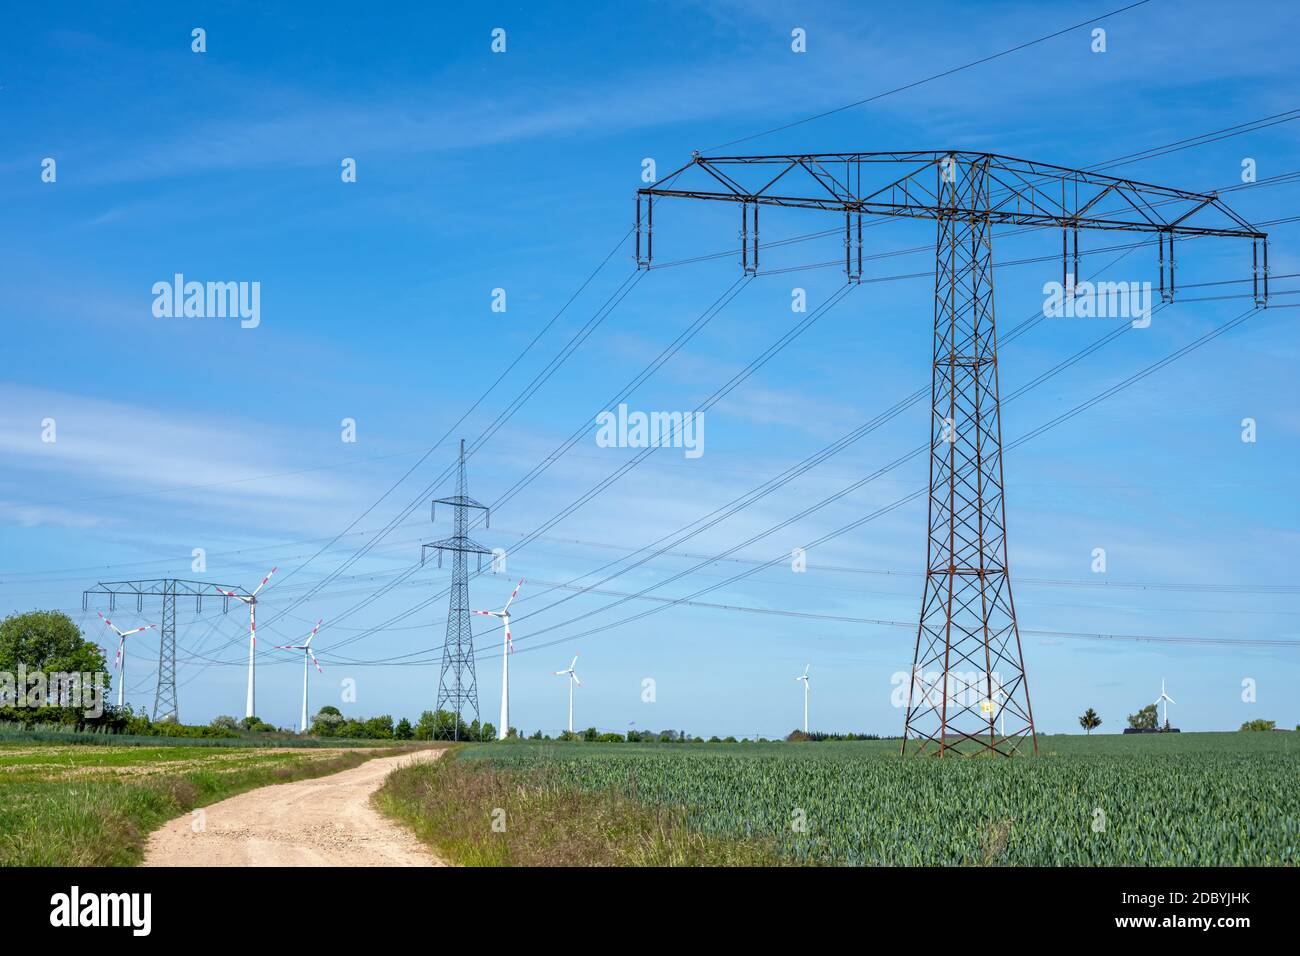 Overhead power lines and some modern wind turbines seen in Germany Stock Photo